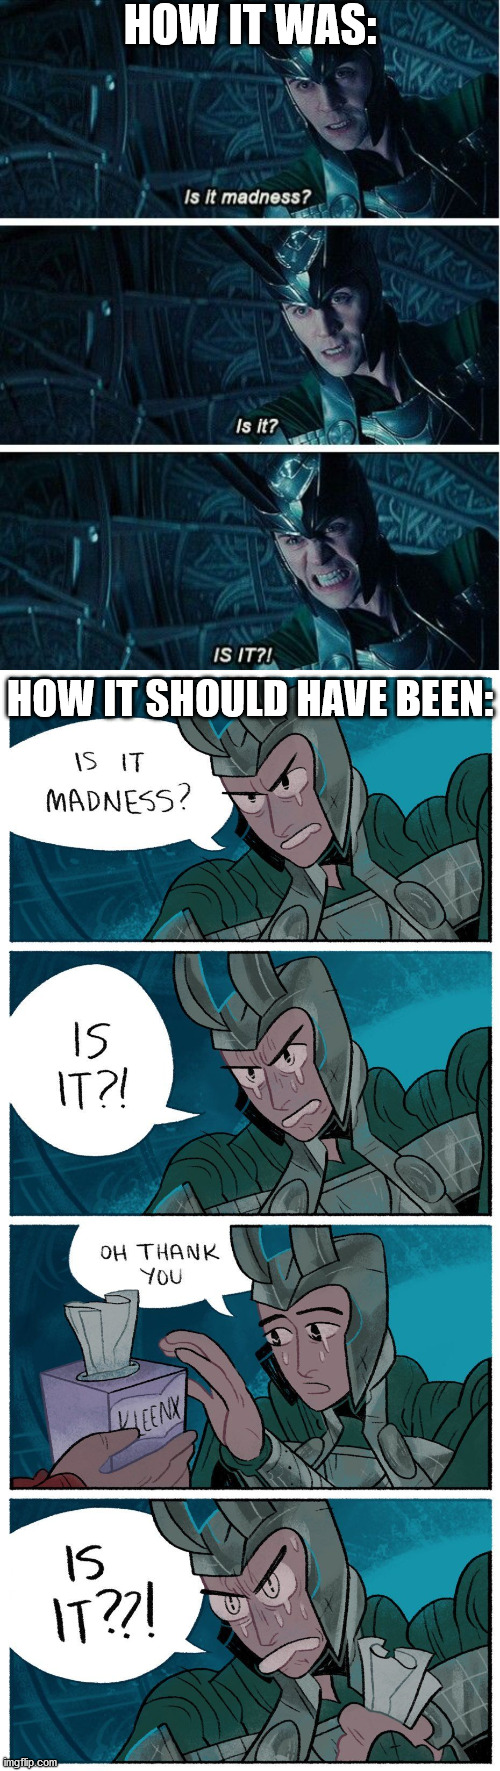 I just want to congratulate the artist for this hysterical comic. | HOW IT WAS:; HOW IT SHOULD HAVE BEEN: | image tagged in thor,loki | made w/ Imgflip meme maker